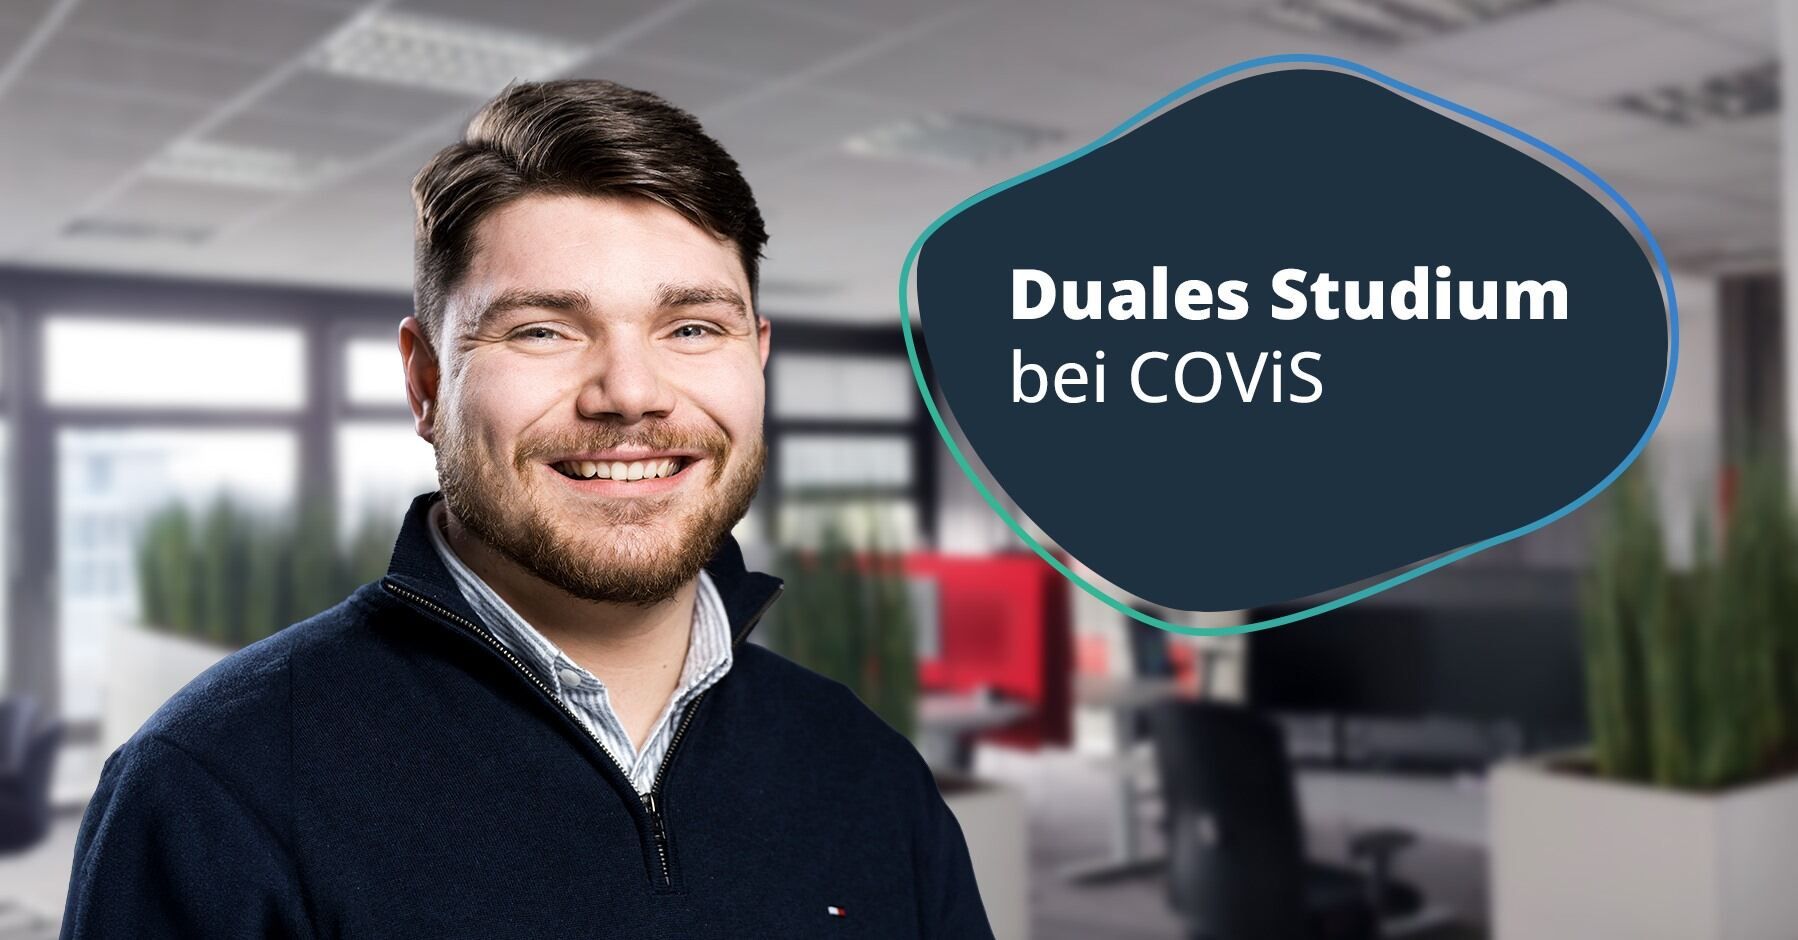 Dual Studies at COViS: Testing the Salesforce Net Zero Cloud in Application